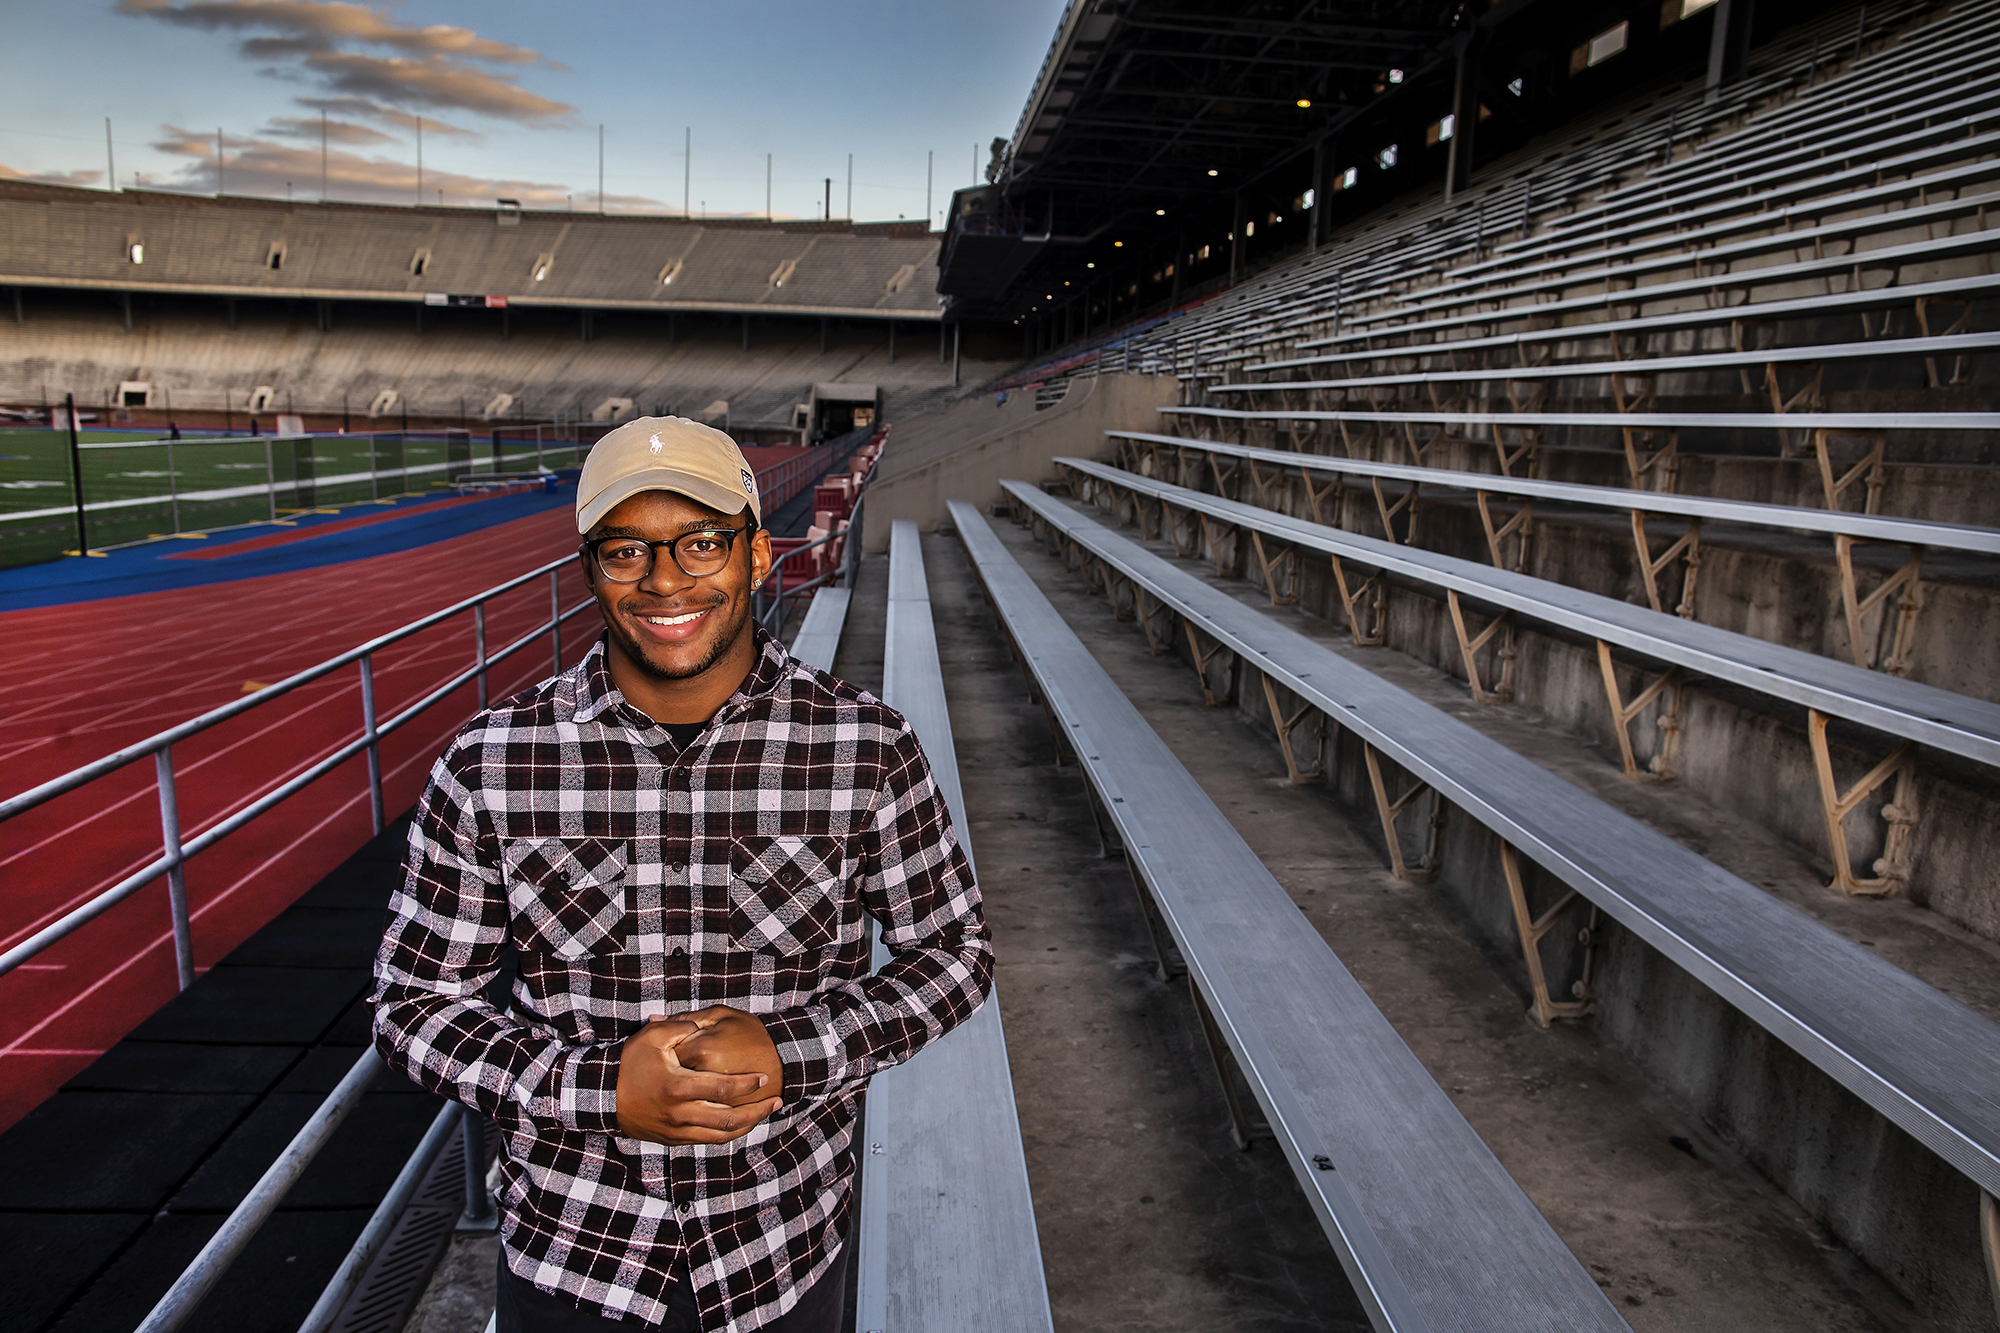 Nick Miller of the Penn football teams poses in the Franklin Field bleachers